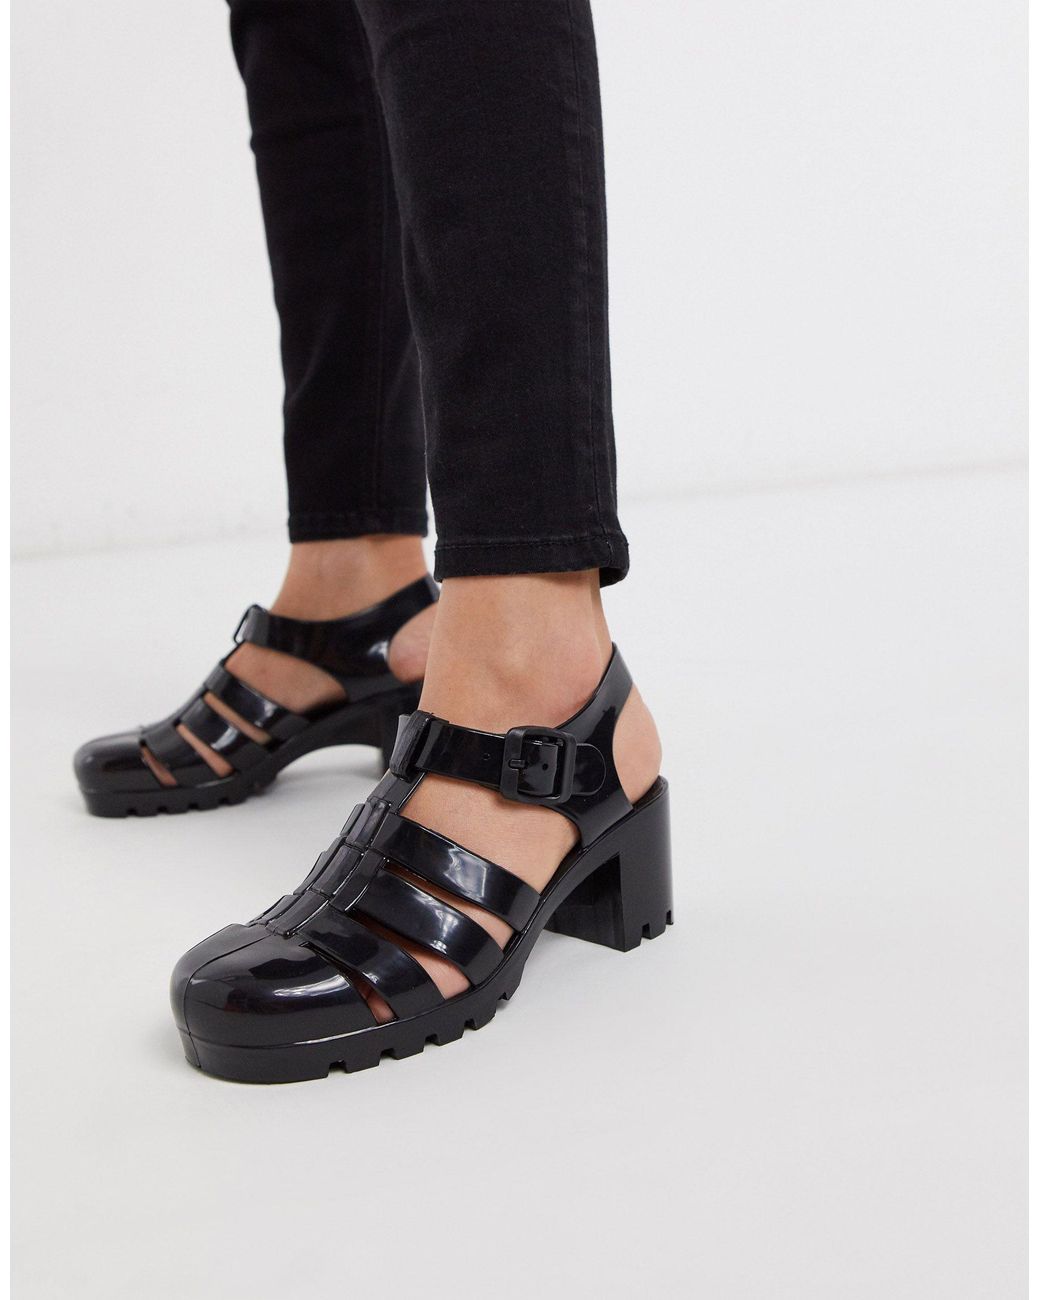 London Rebel Heeled Jelly Shoes in Black | Lyst